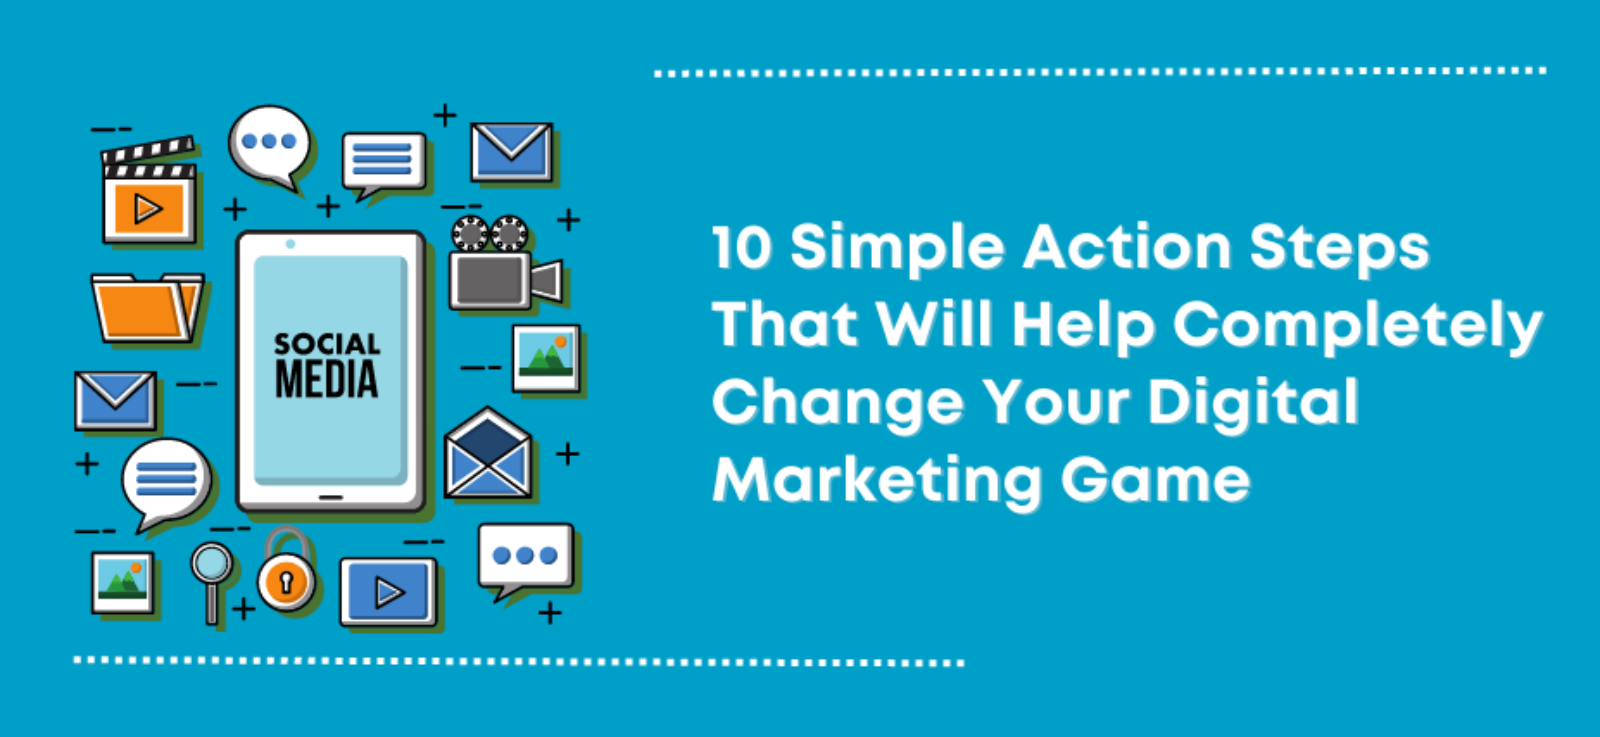 10 Simple Action Steps That Will Help Completely Change Your Digital Marketing Game